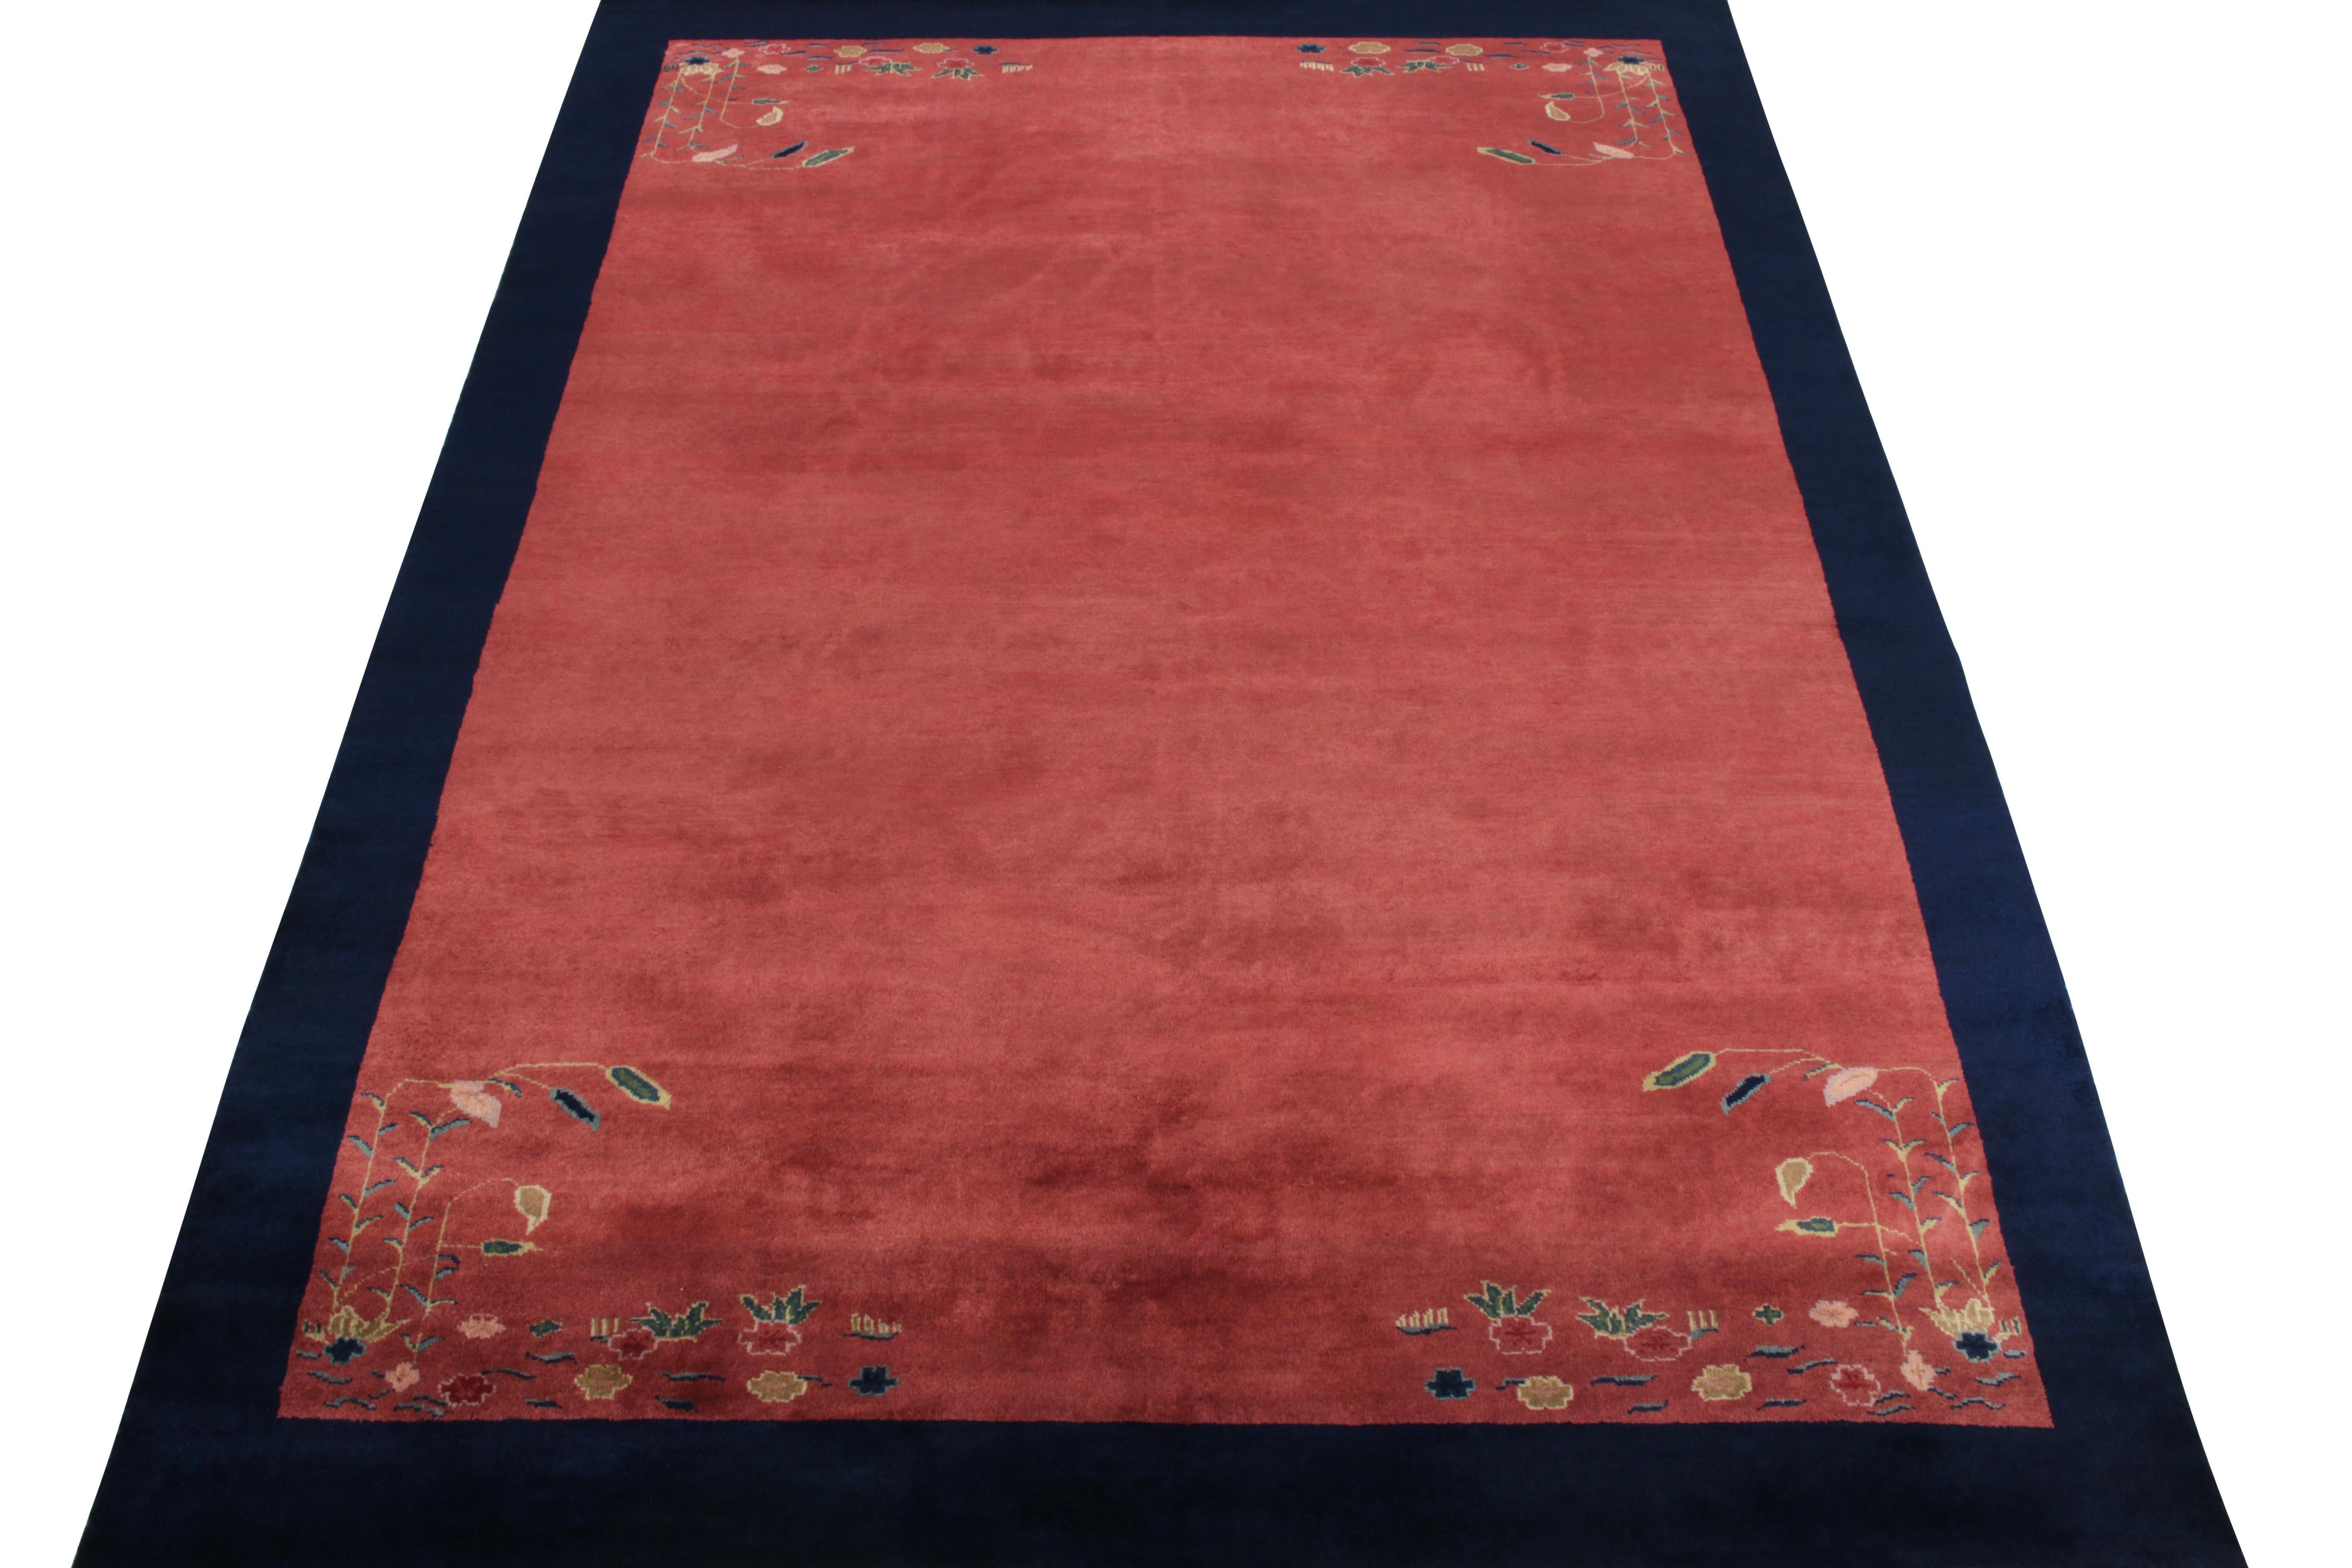 Hand-knotted in wool, a 7 x 10 ode to Chinese art deco rugs from our Antique & Vintage collection bearing classic sensibilities of the 1920s. This vintage rug enjoys a healthy pile in coral red with mild light and dark spots on the field for a